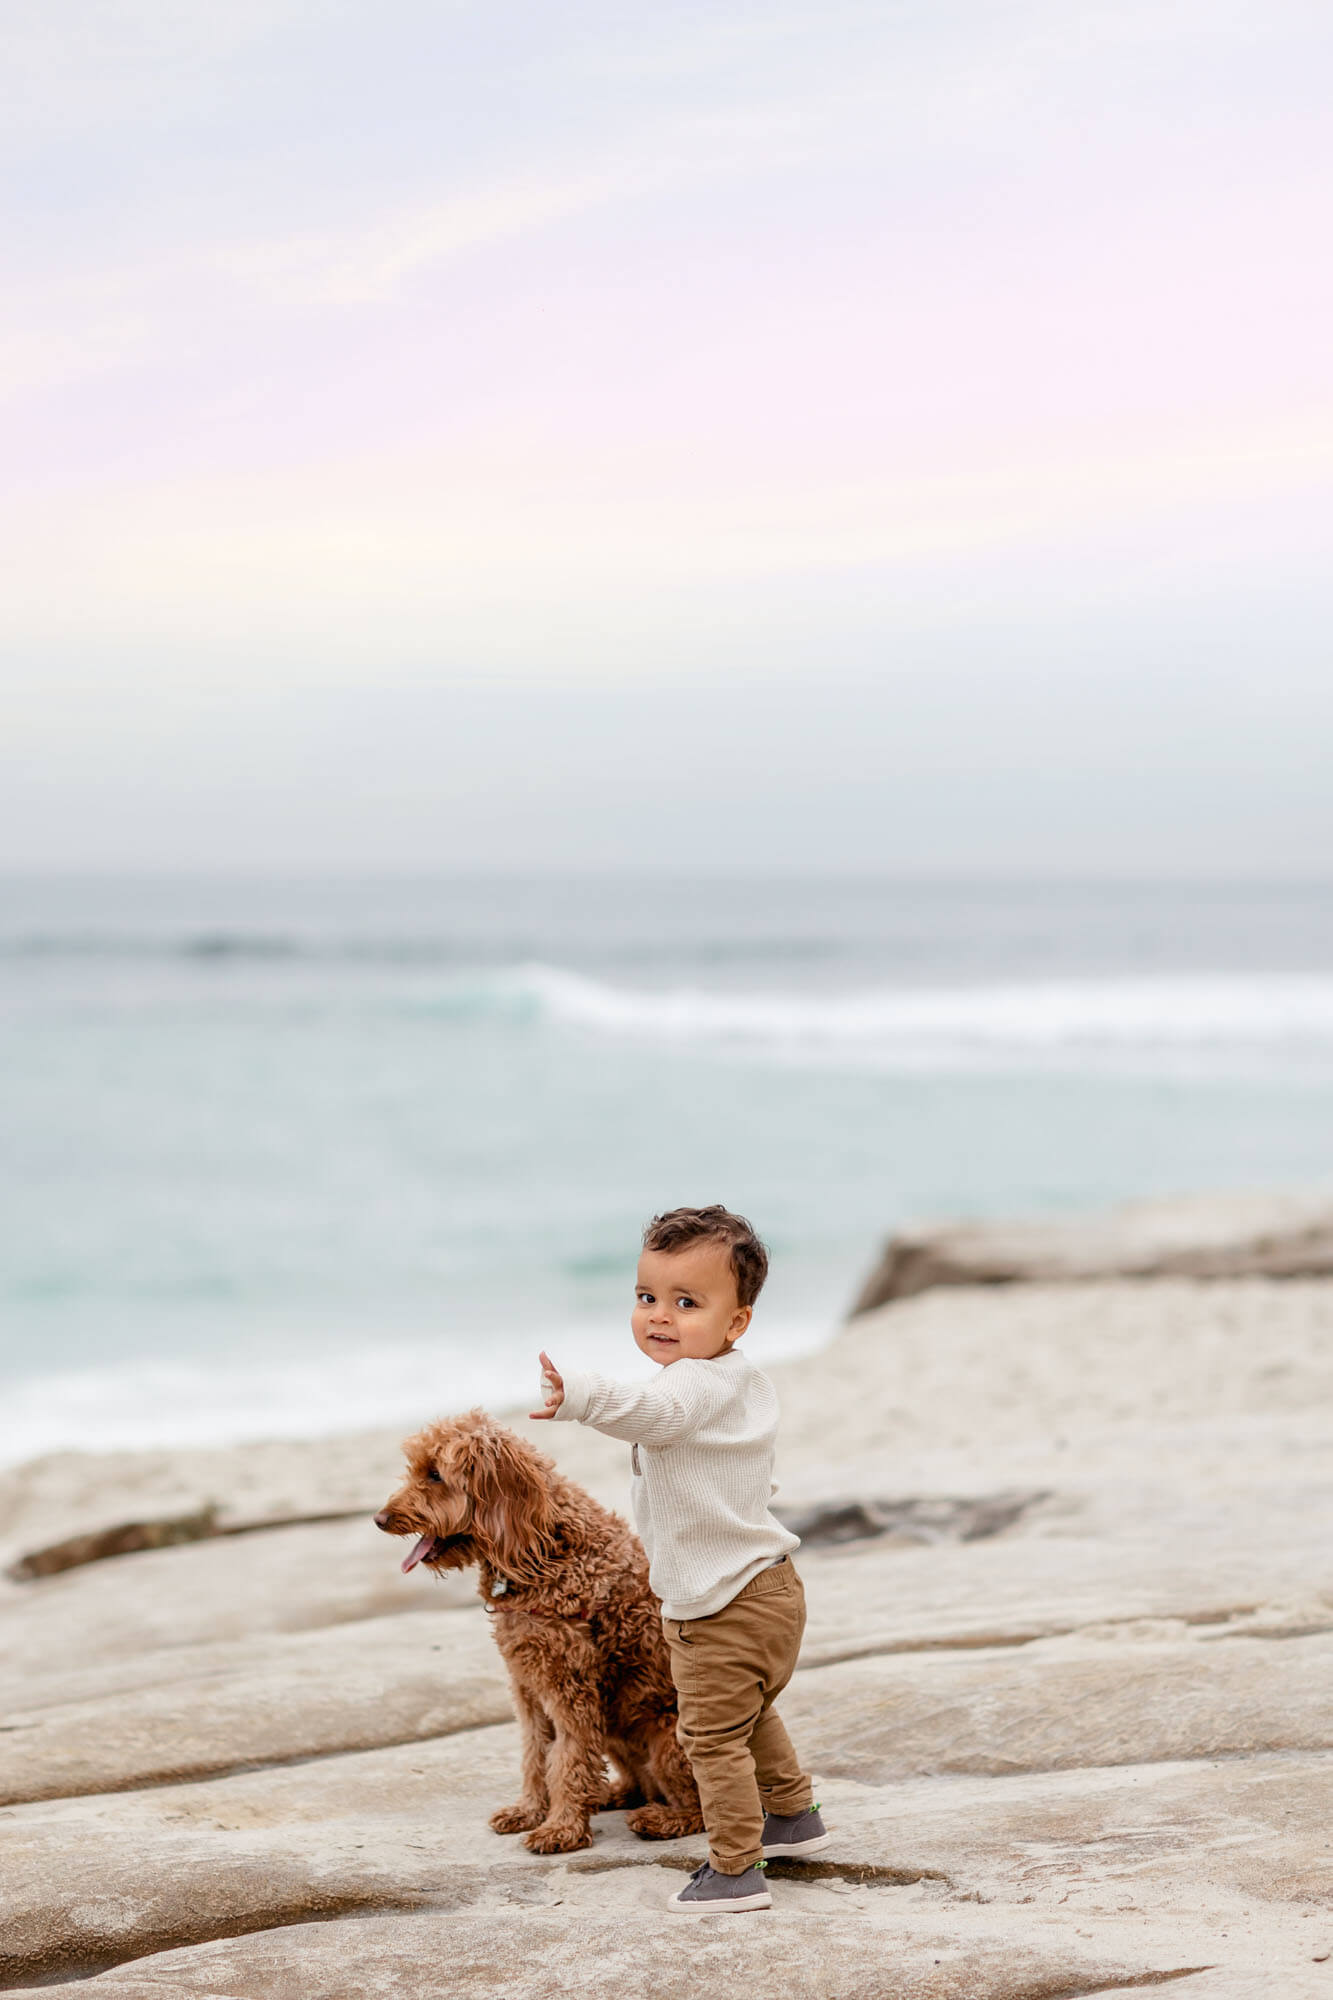 Windansea Beach is on my list of Best Locations for San Diego Family Photos by San Diego Family Photographer